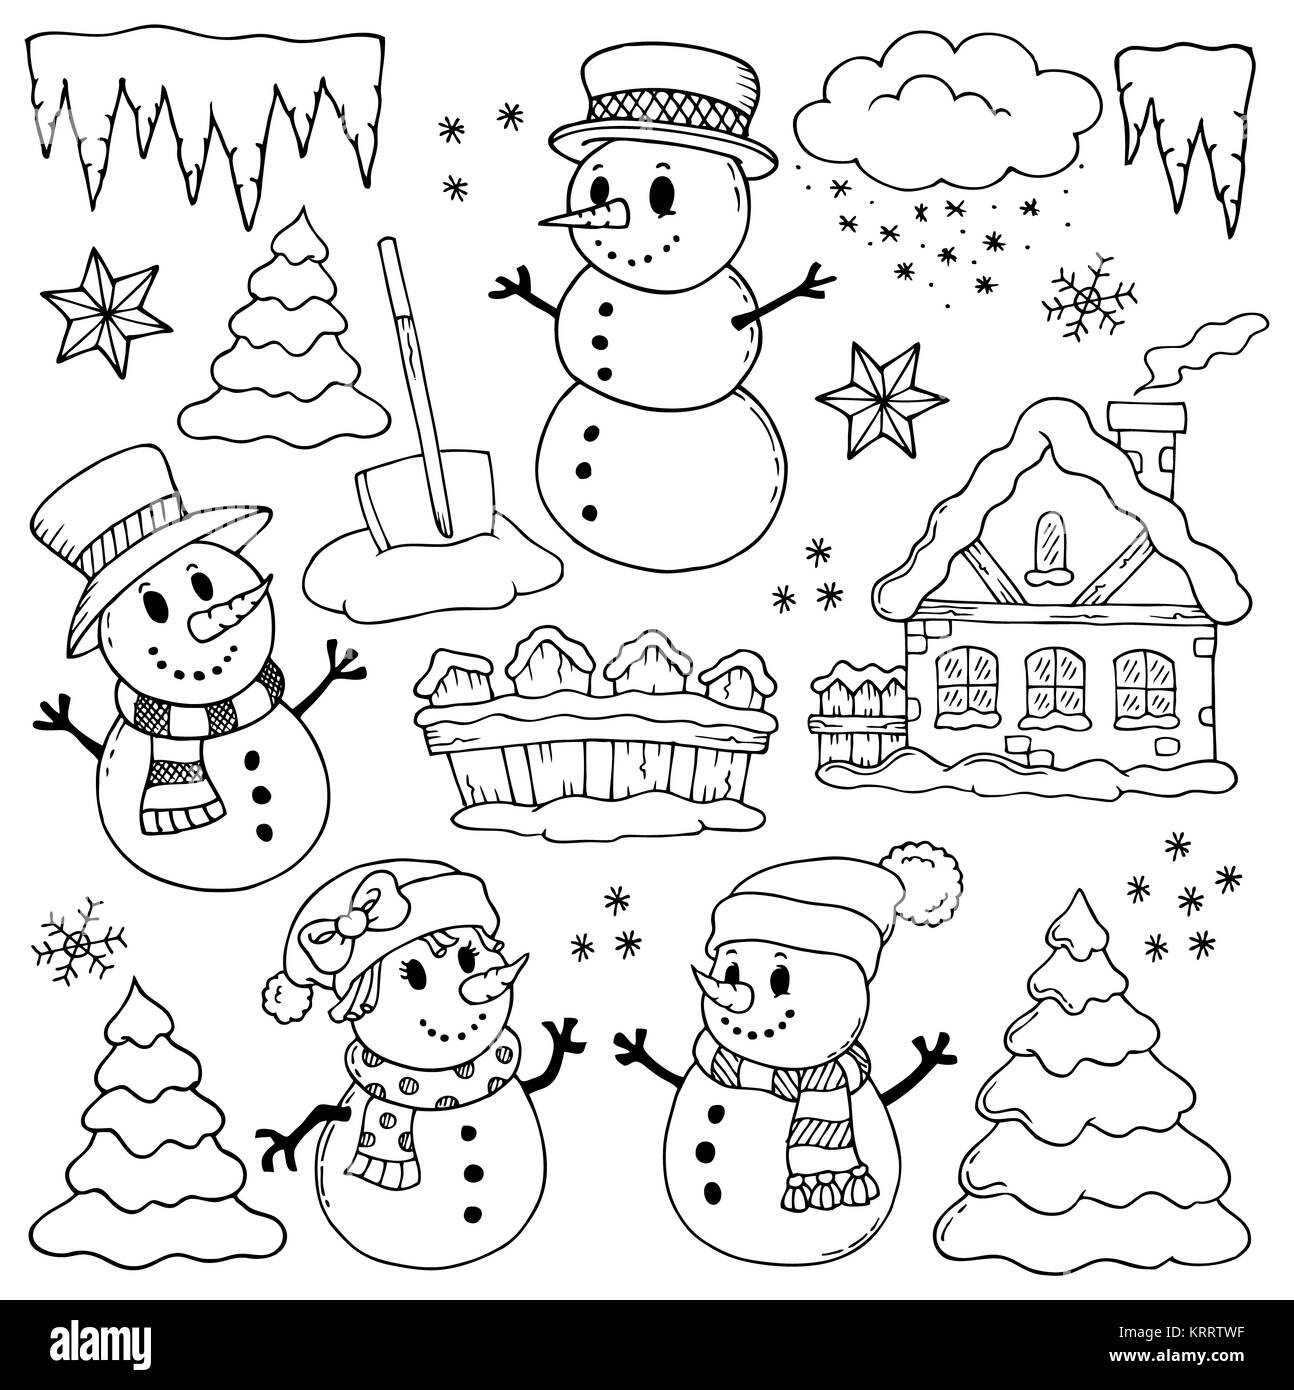 Details more than 78 winter sketch images best - in.eteachers